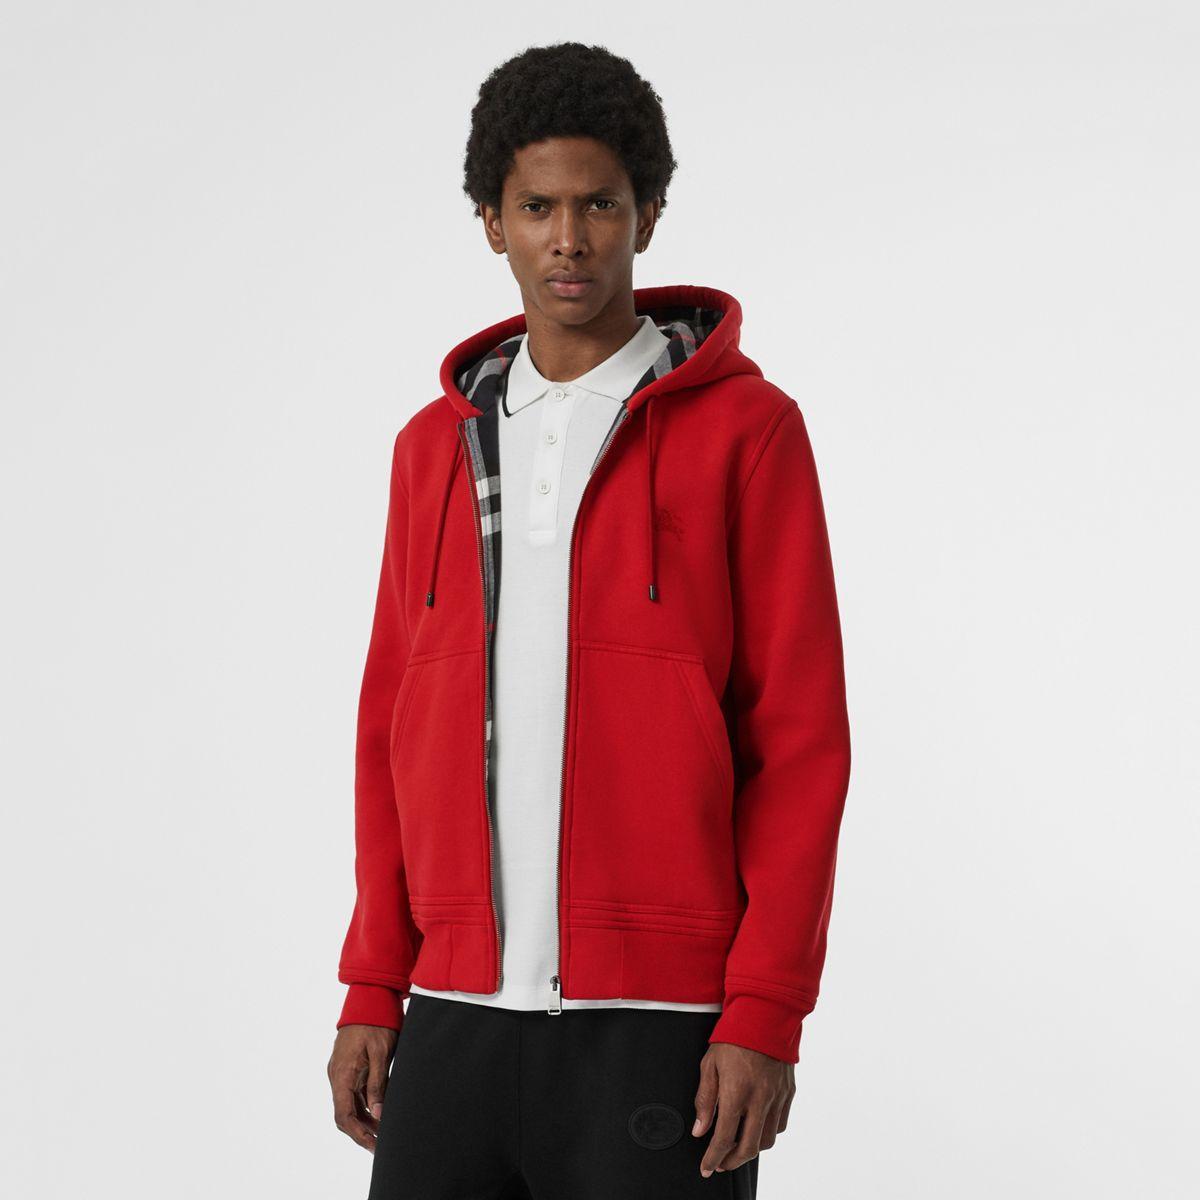 burberry jersey hooded top